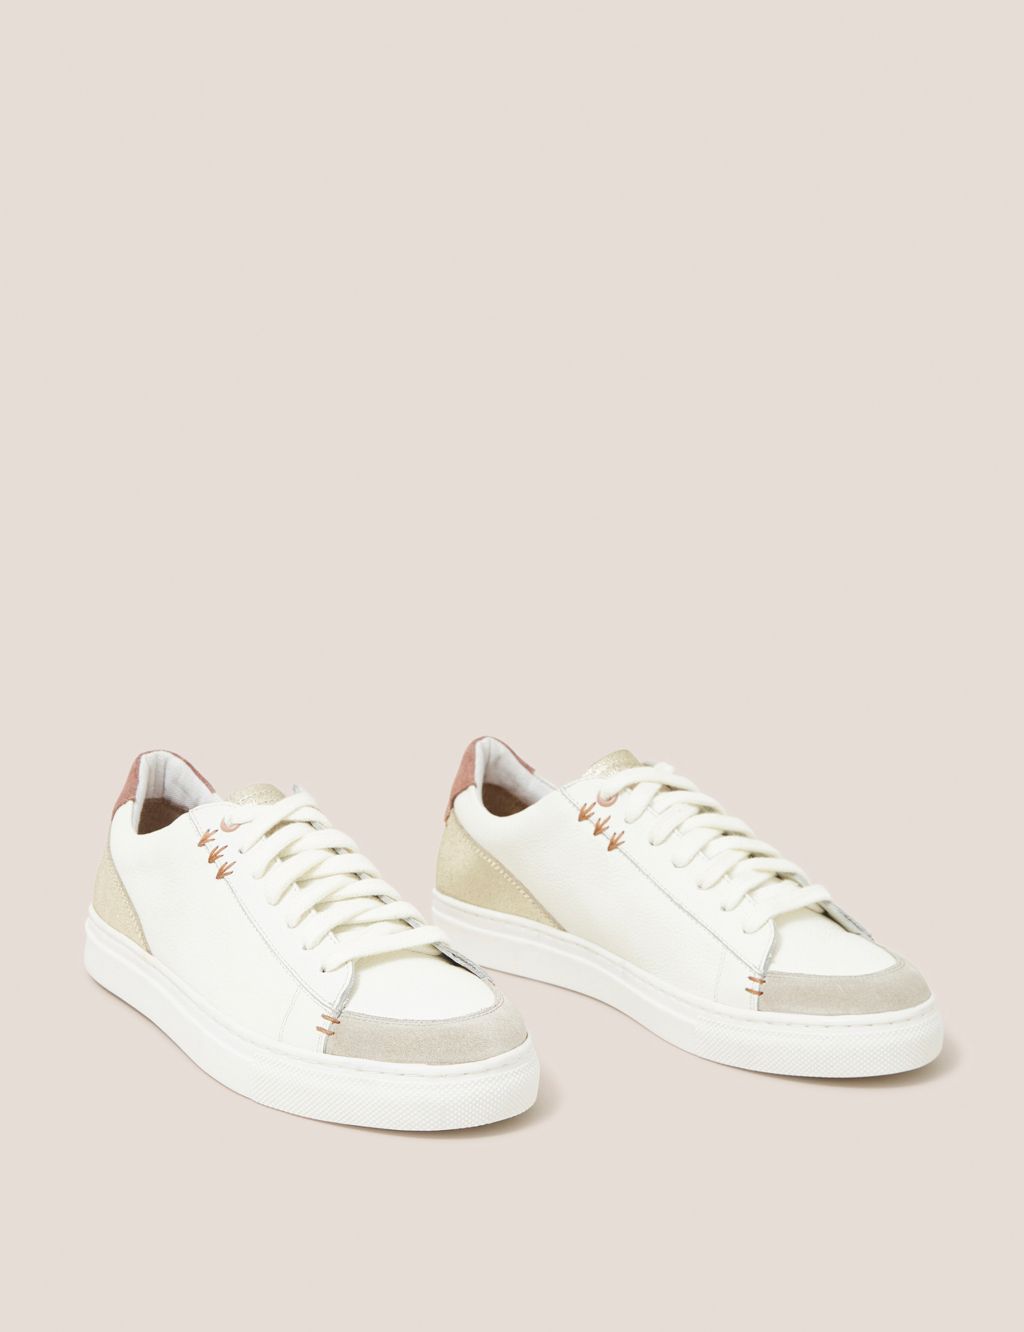 Leather Lace Up Trainers image 1